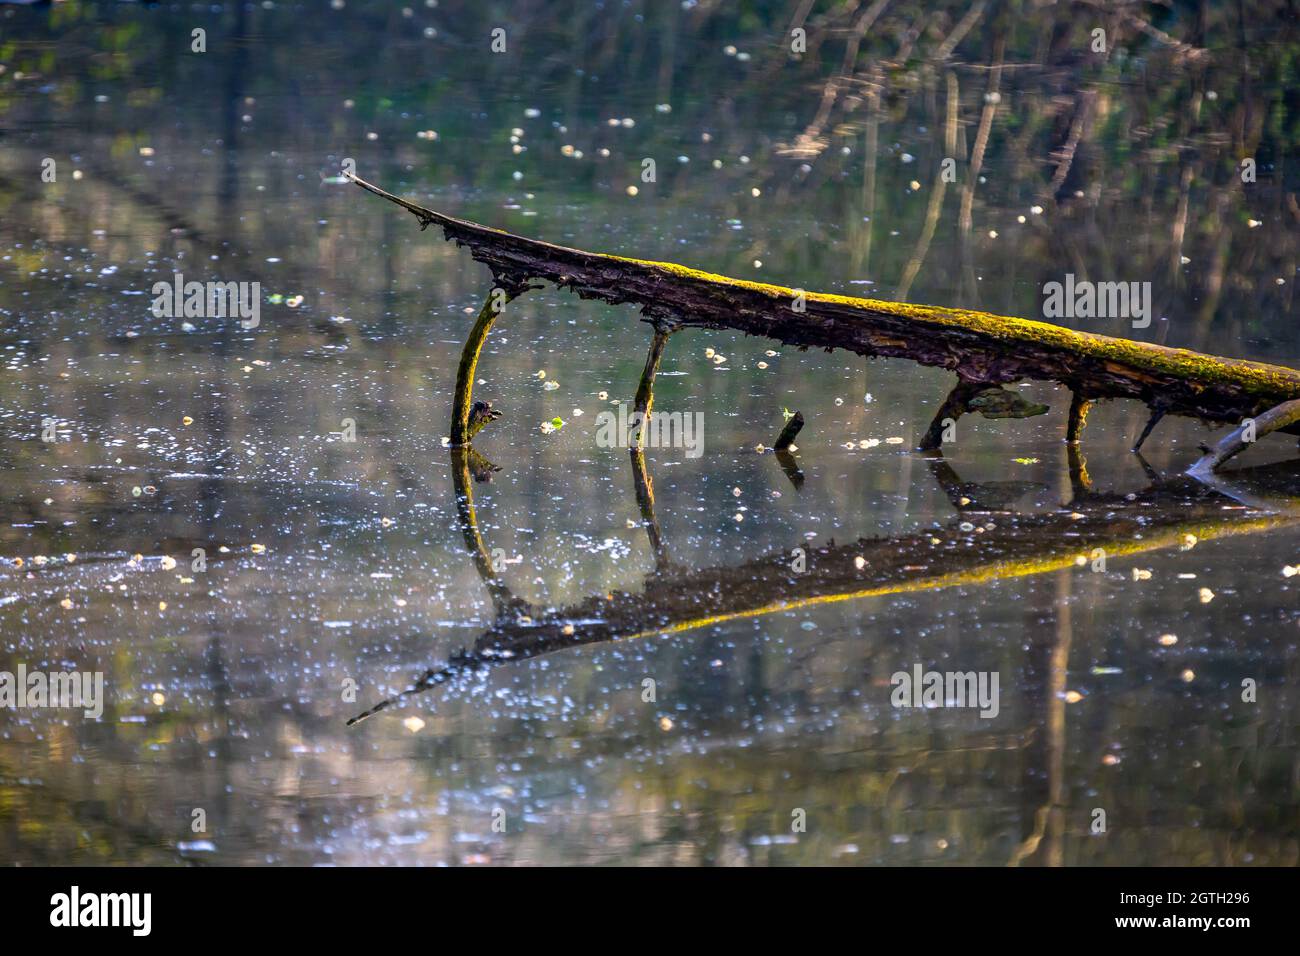 A fallen tree branch reflected in the water of a still lake. Stock Photo